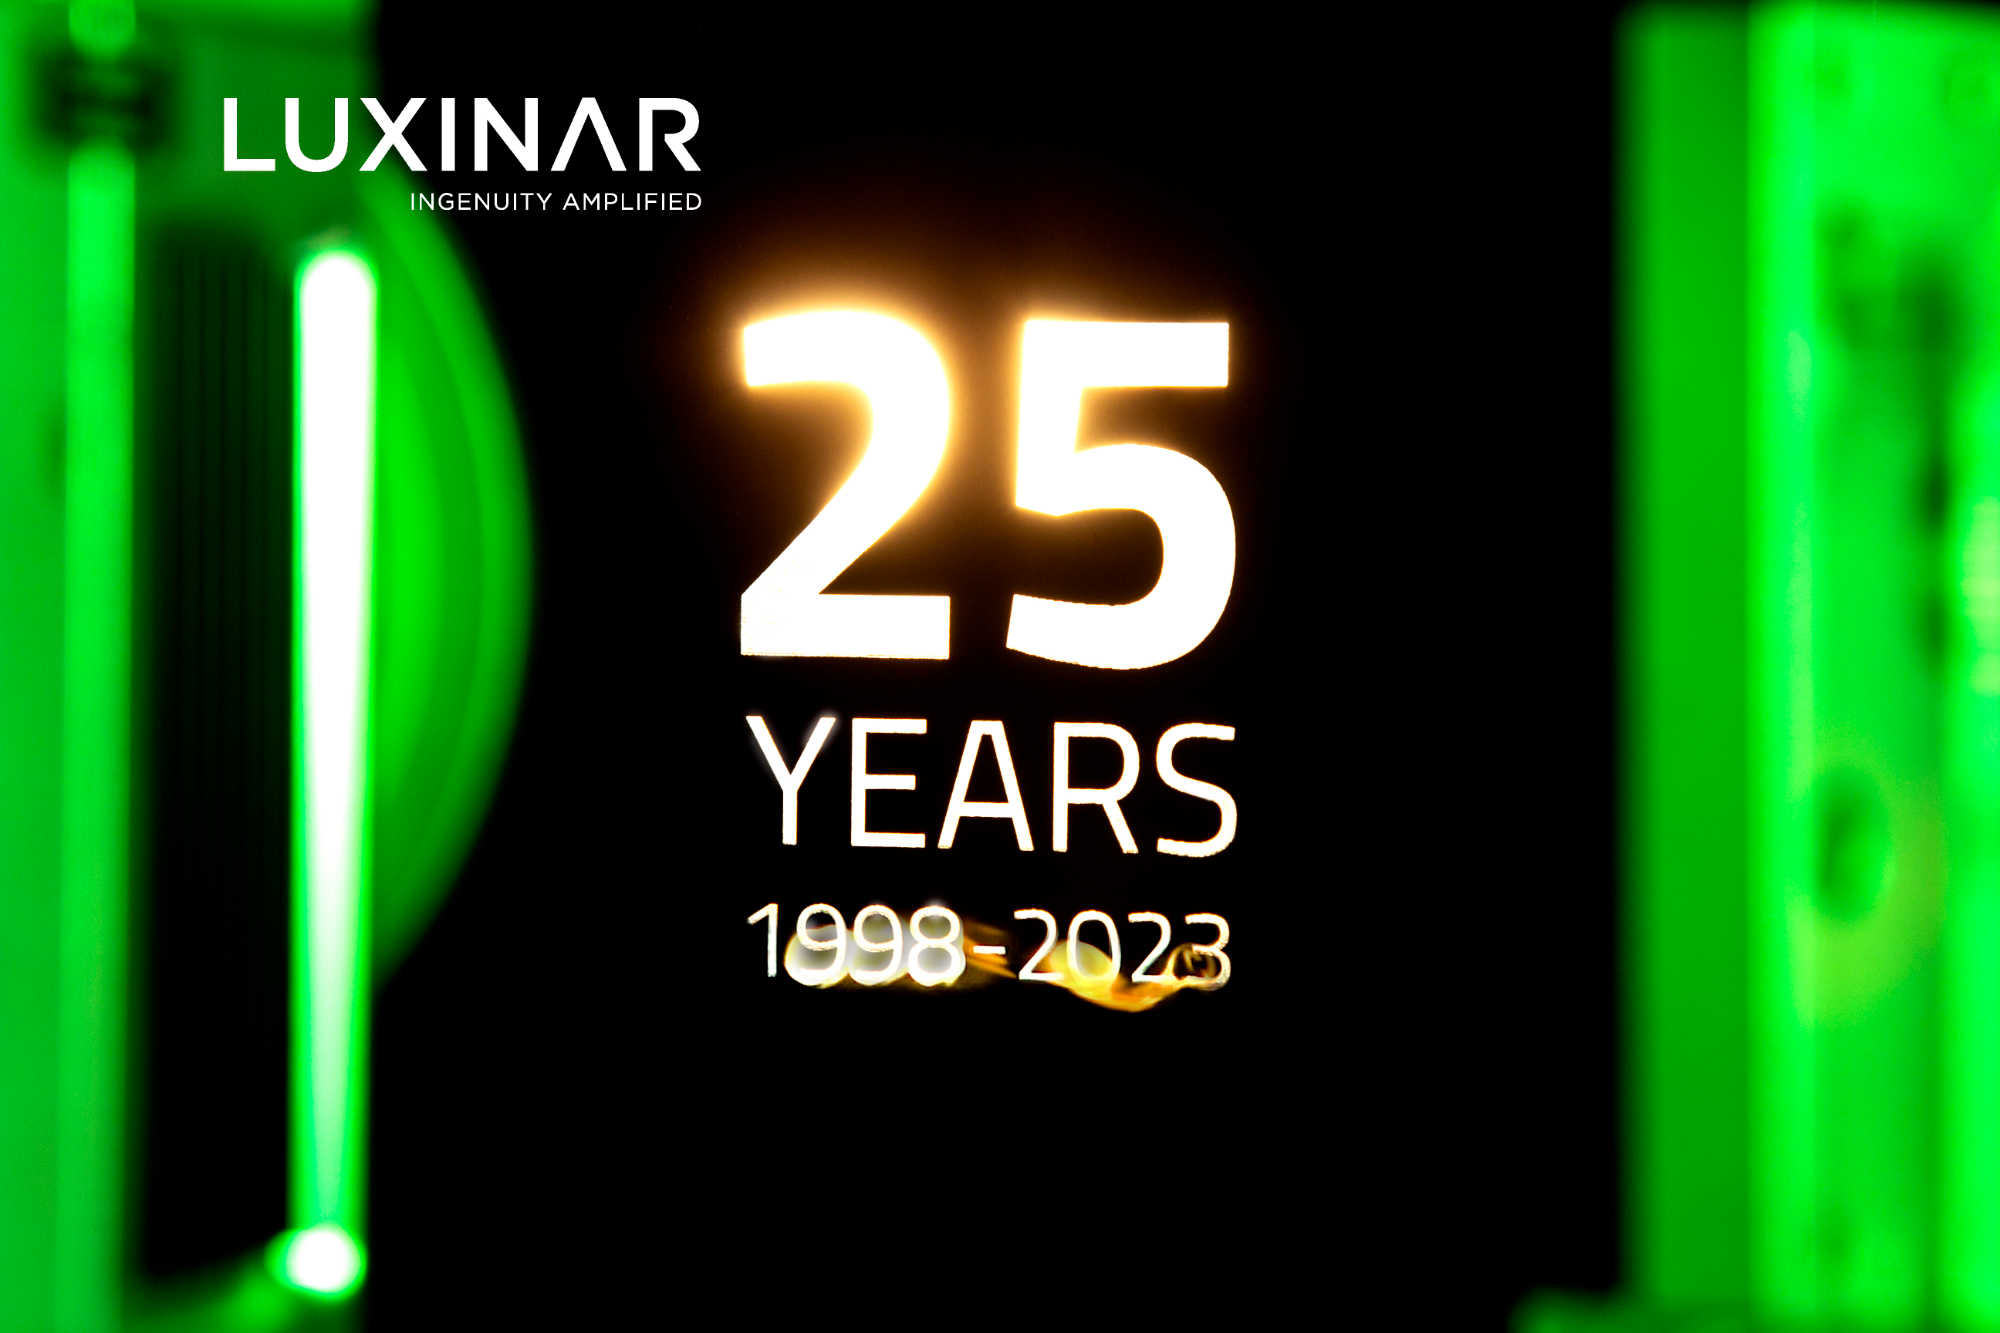 Luxinar Kicks off Its 25th Anniversary Year at Photonics West 2023